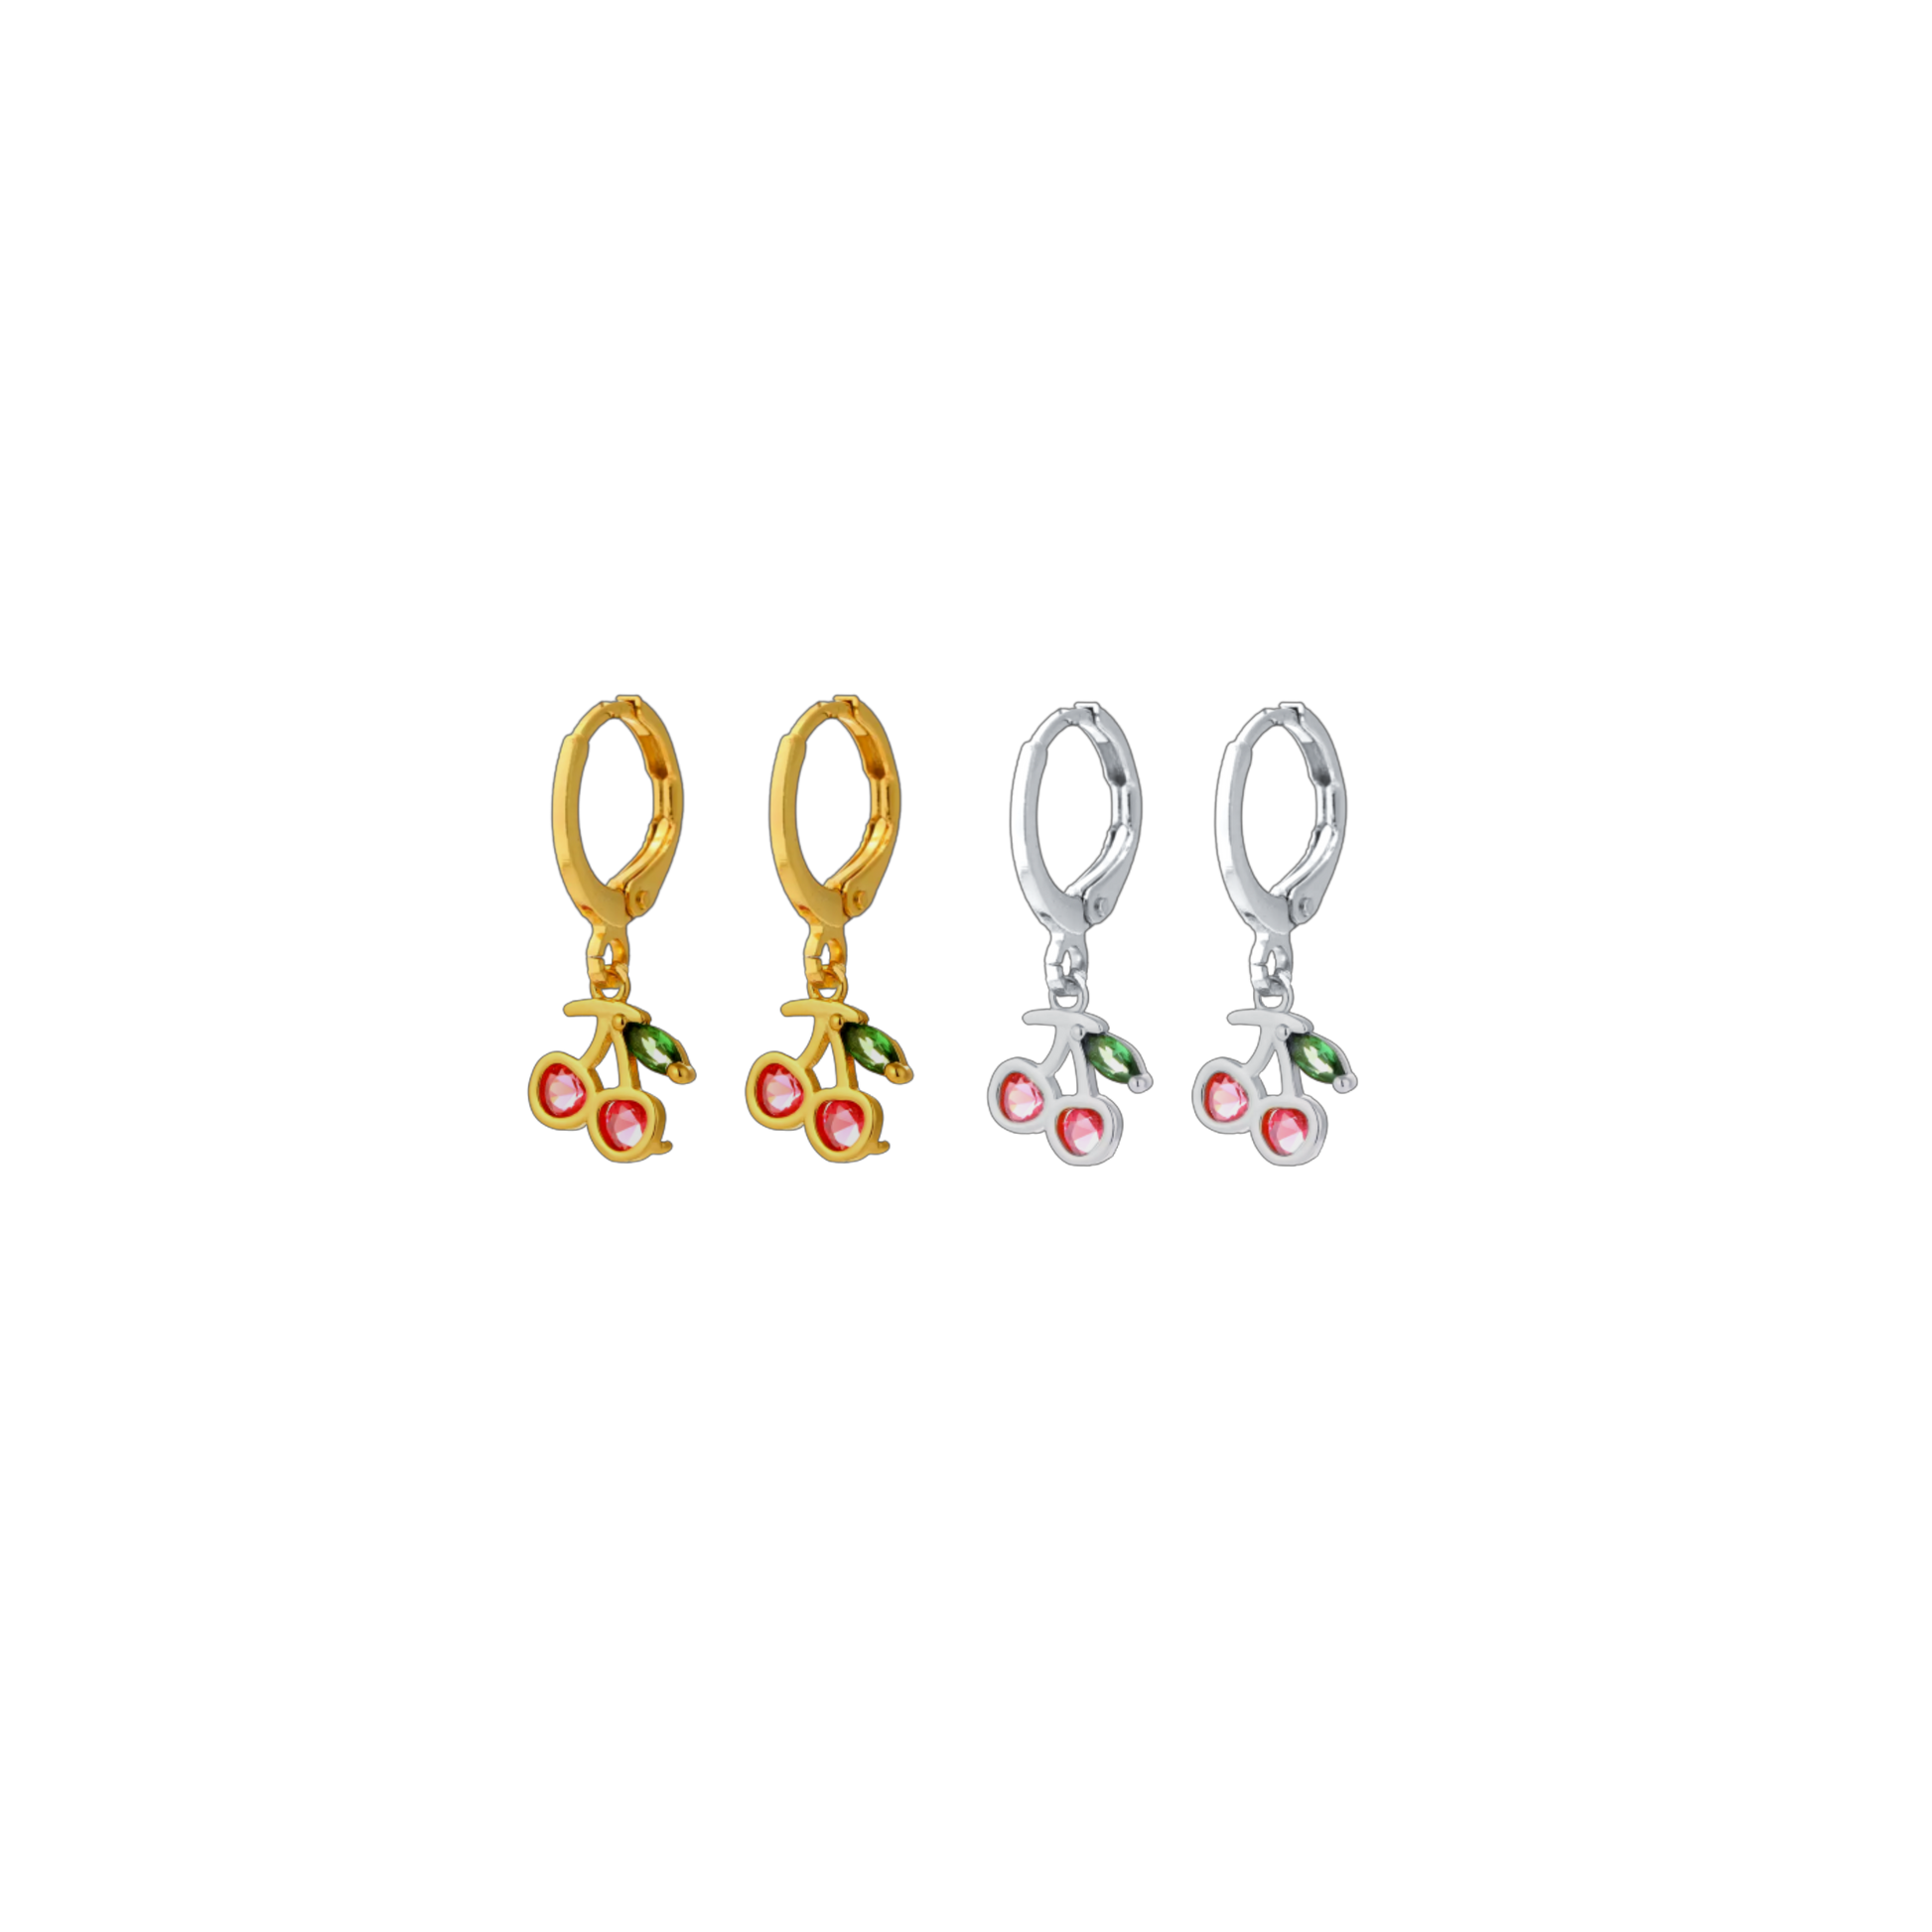 Adorable Baby Earrings Collection